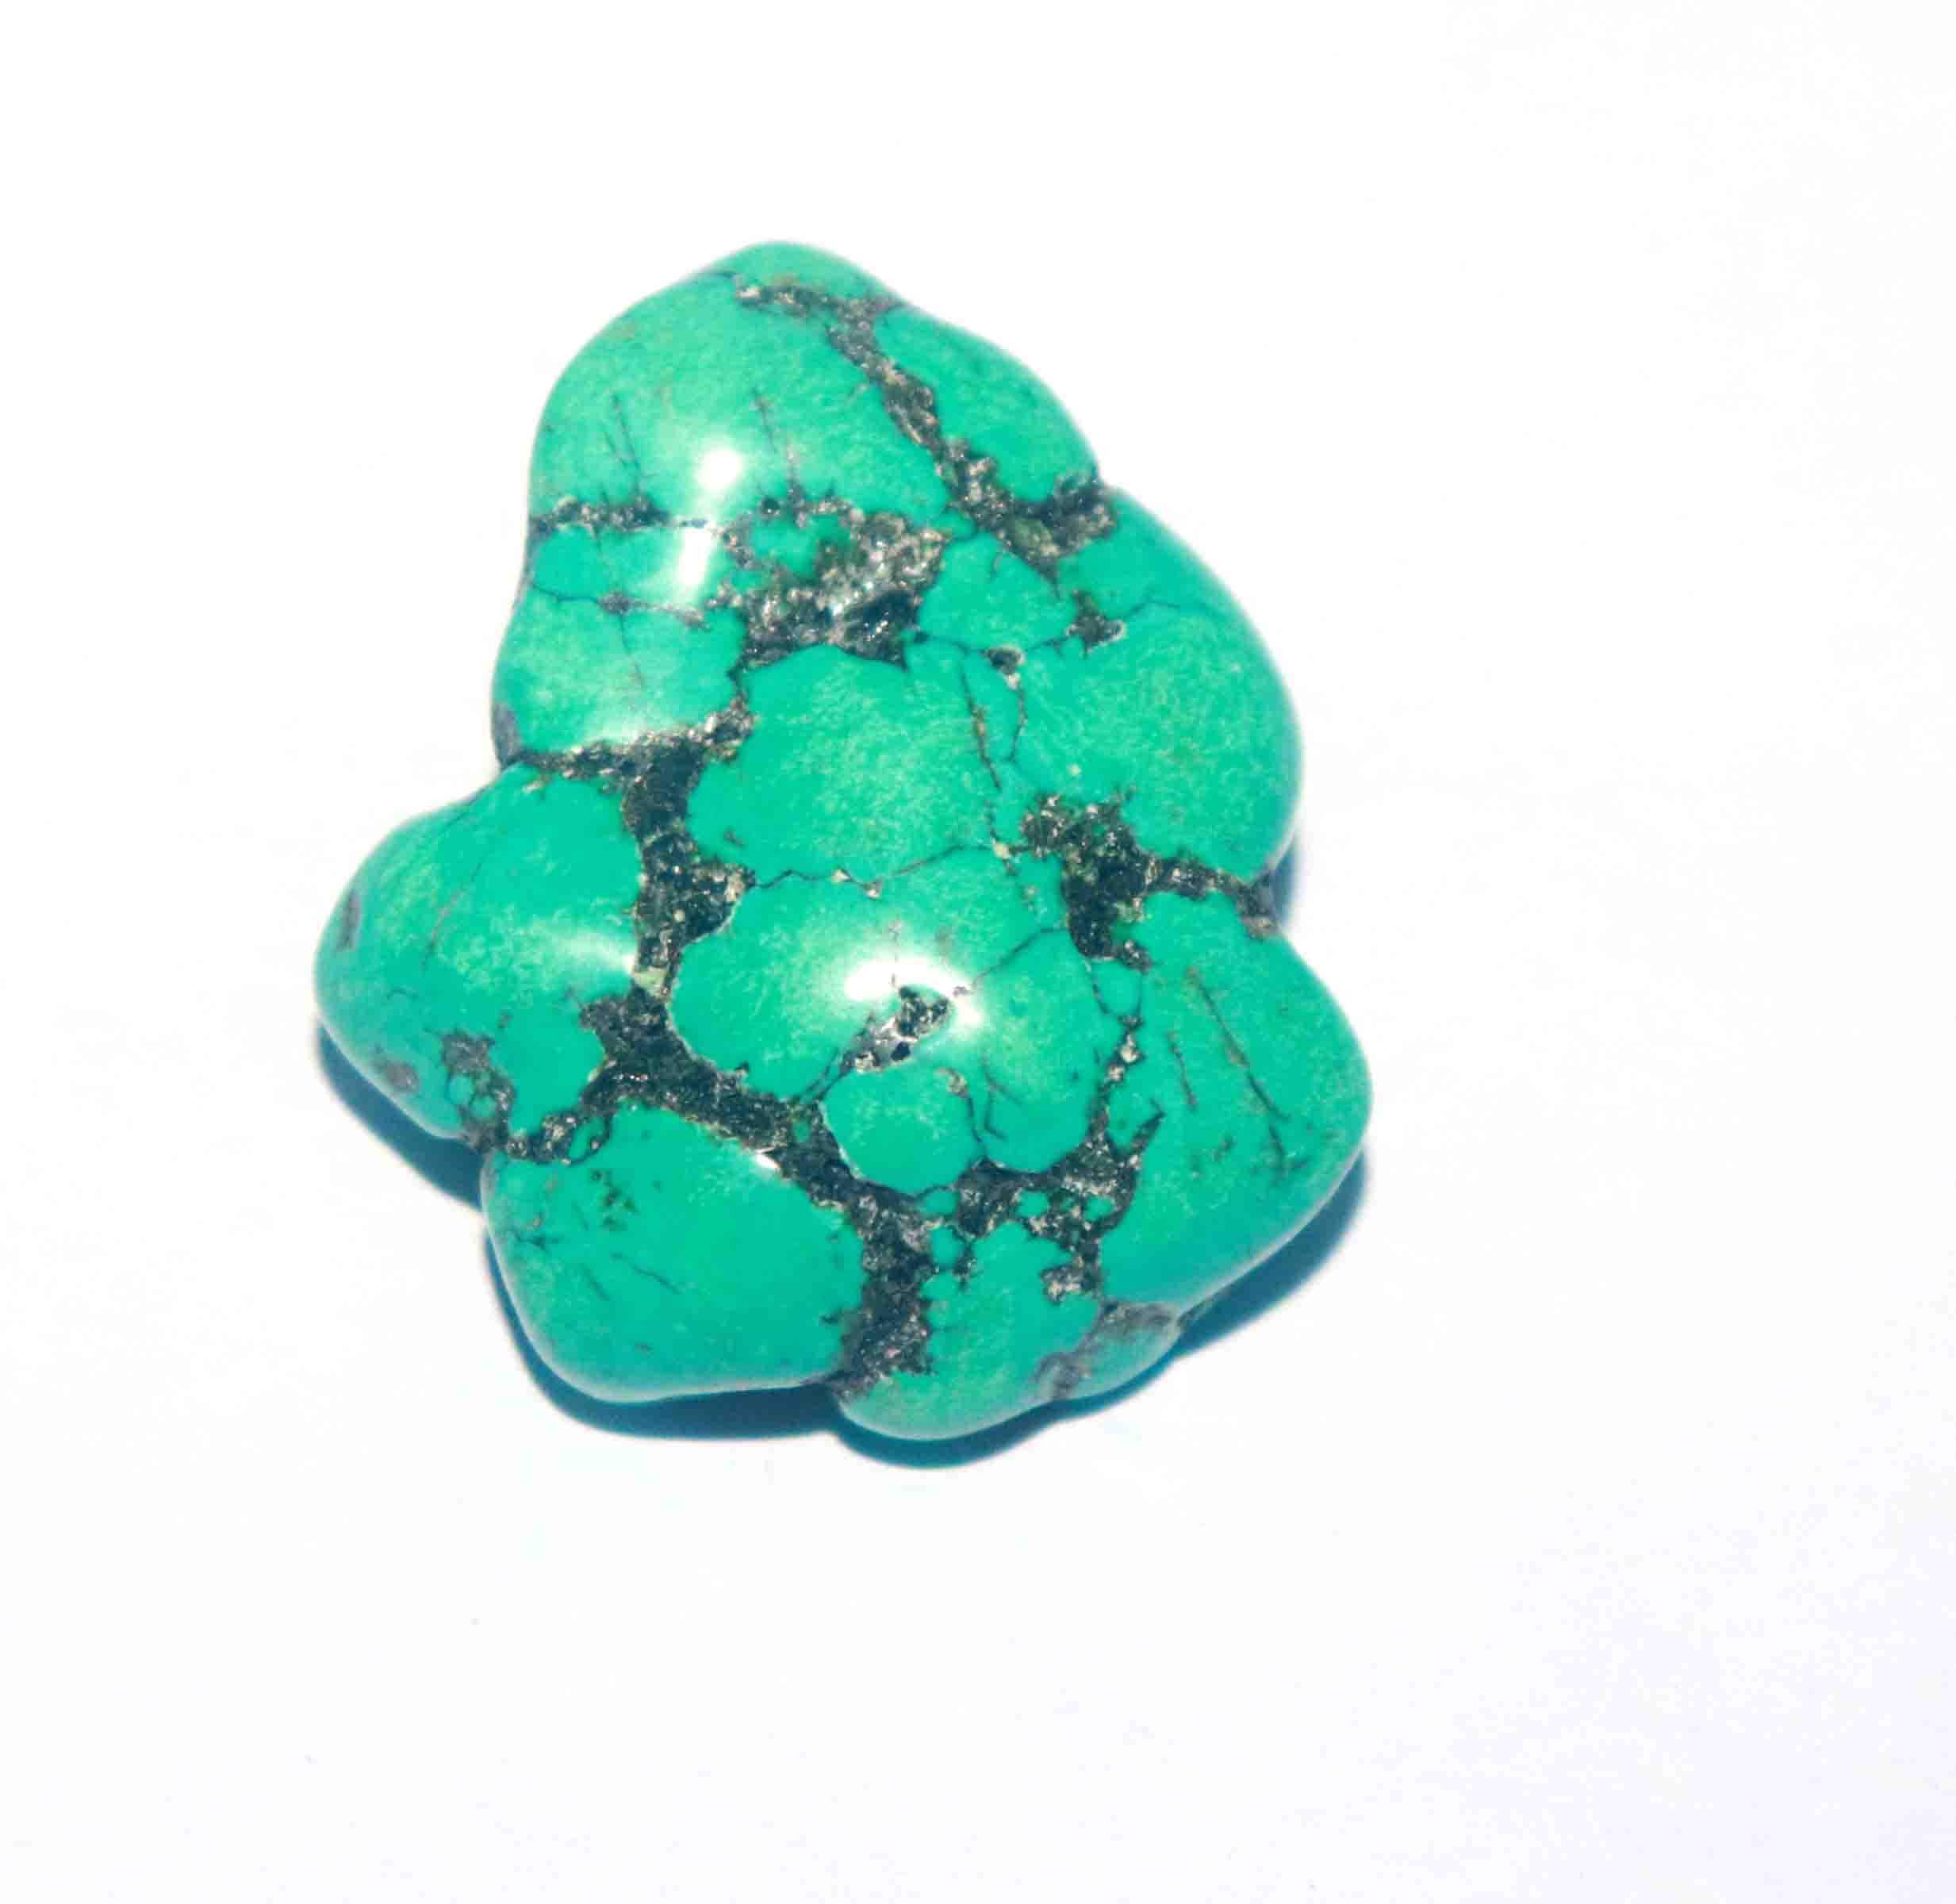 Raw Turquoise Stone From Tanzania 136 10 Ct Certified Natural Etsy